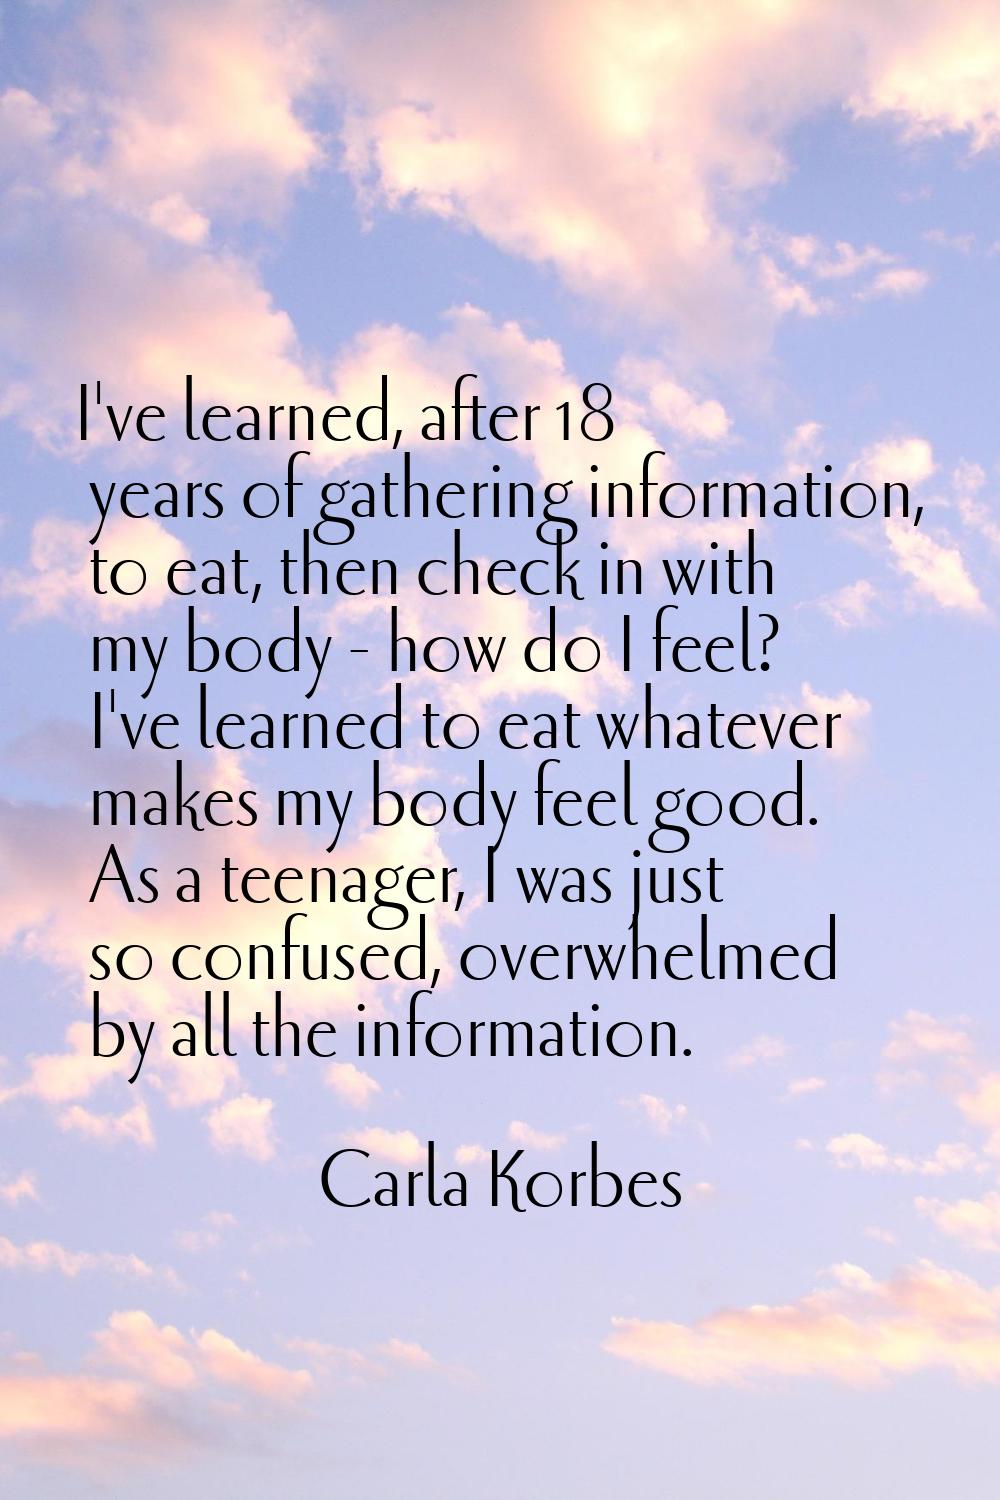 I've learned, after 18 years of gathering information, to eat, then check in with my body - how do 